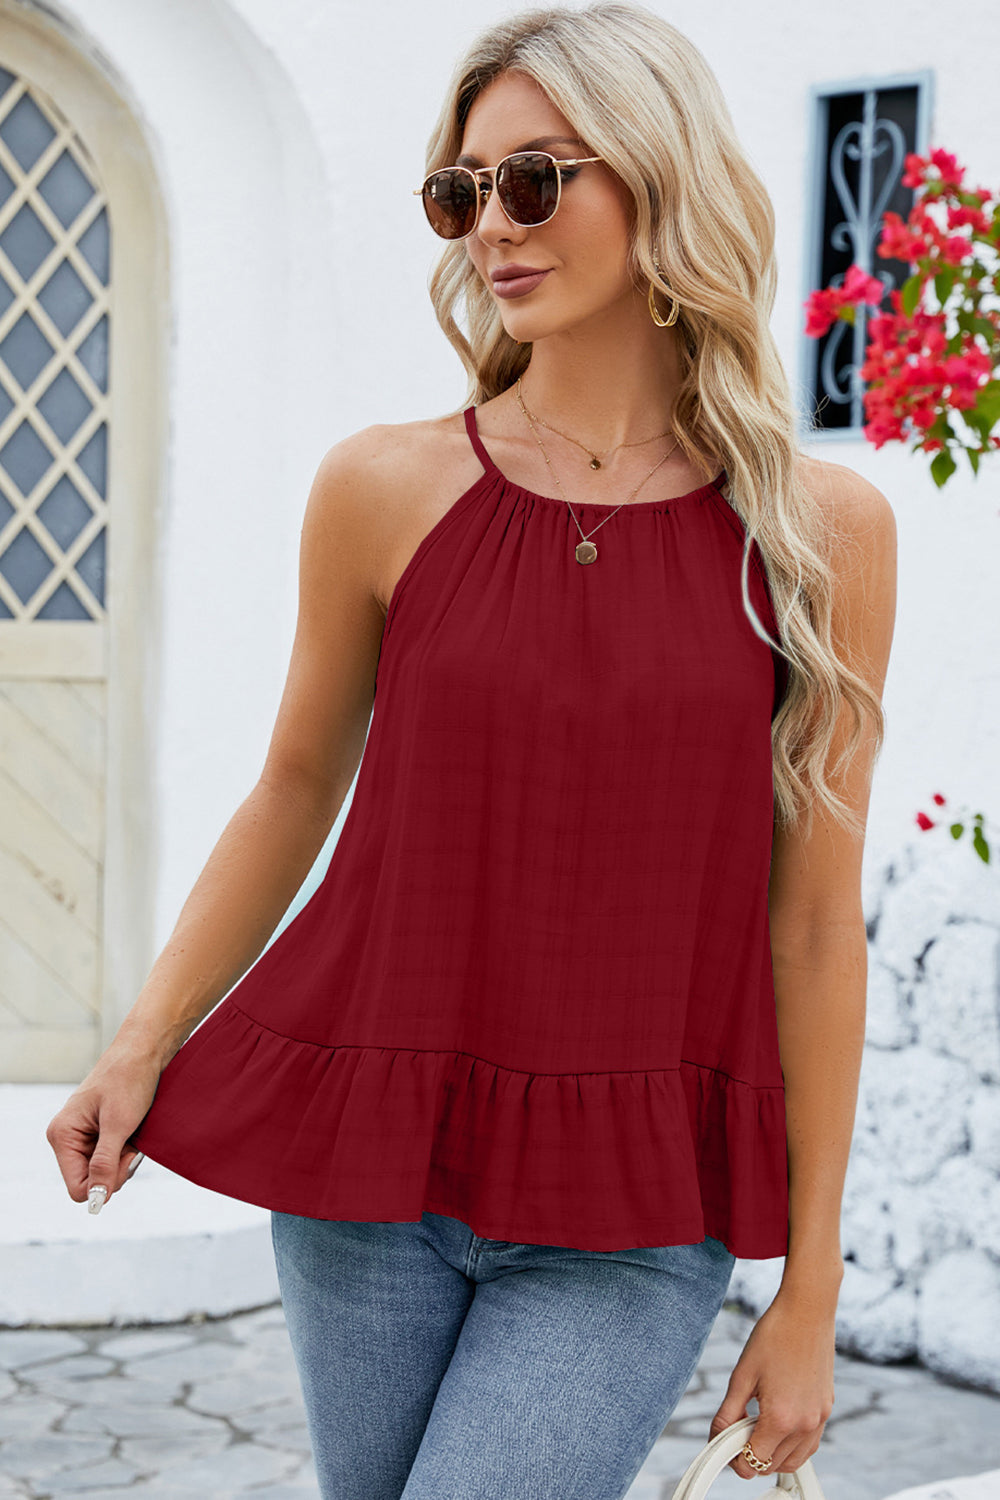 Tied Ruffled Round Neck Cami Casual Chic Boutique